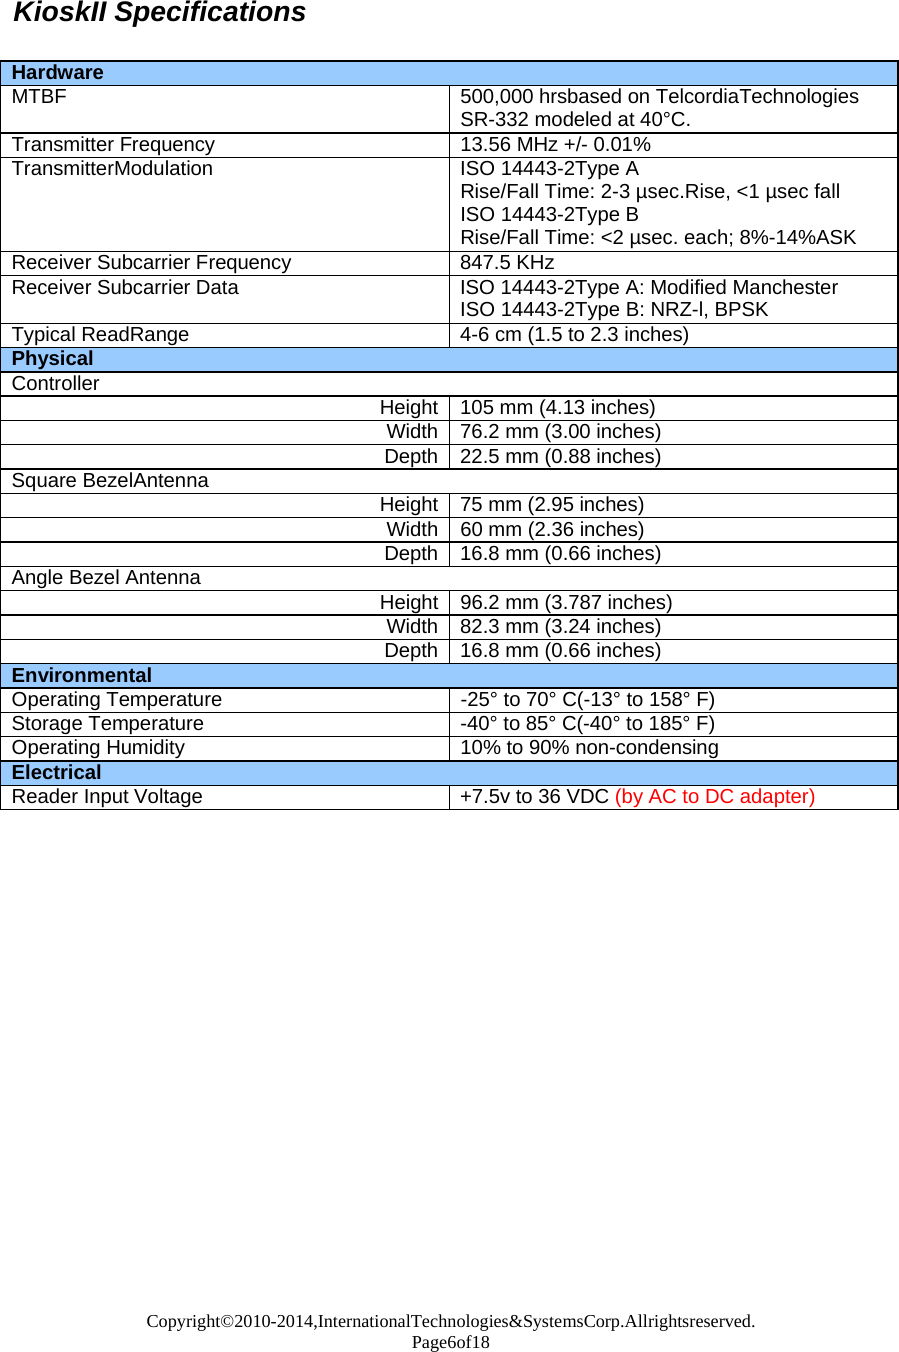 Copyright©2010-2014,InternationalTechnologies&amp;SystemsCorp.Allrightsreserved. Page6of18  KioskII Specifications   Hardware MTBF 500,000 hrsbased on TelcordiaTechnologiesSR-332 modeled at 40°C. Transmitter Frequency  13.56 MHz +/-0.01%TransmitterModulation ISO 14443-2Type ARise/Fall Time: 2-3 µsec.Rise, &lt;1 µsec fall ISO 14443-2Type B Rise/Fall Time: &lt;2 µsec. each; 8%-14%ASK Receiver Subcarrier Frequency 847.5 KHzReceiver Subcarrier Data  ISO 14443-2Type A: Modified Manchester ISO 14443-2Type B: NRZ-l, BPSK Typical ReadRange  4-6 cm (1.5 to 2.3 inches)Physical Controller Height 105 mm (4.13 inches)Width 76.2 mm (3.00 inches)Depth 22.5 mm (0.88 inches)Square BezelAntenna Height 75 mm (2.95 inches)Width 60 mm (2.36 inches)Depth 16.8 mm (0.66 inches)Angle Bezel Antenna Height 96.2 mm (3.787 inches)Width 82.3 mm (3.24 inches)Depth 16.8 mm (0.66 inches)Environmental Operating Temperature  -25° to 70° C(-13° to 158° F) Storage Temperature -40° to 85° C(-40° to 185° F) Operating Humidity  10% to 90% non-condensing Electrical Reader Input Voltage +7.5v to 36 VDC (by AC to DC adapter)                       